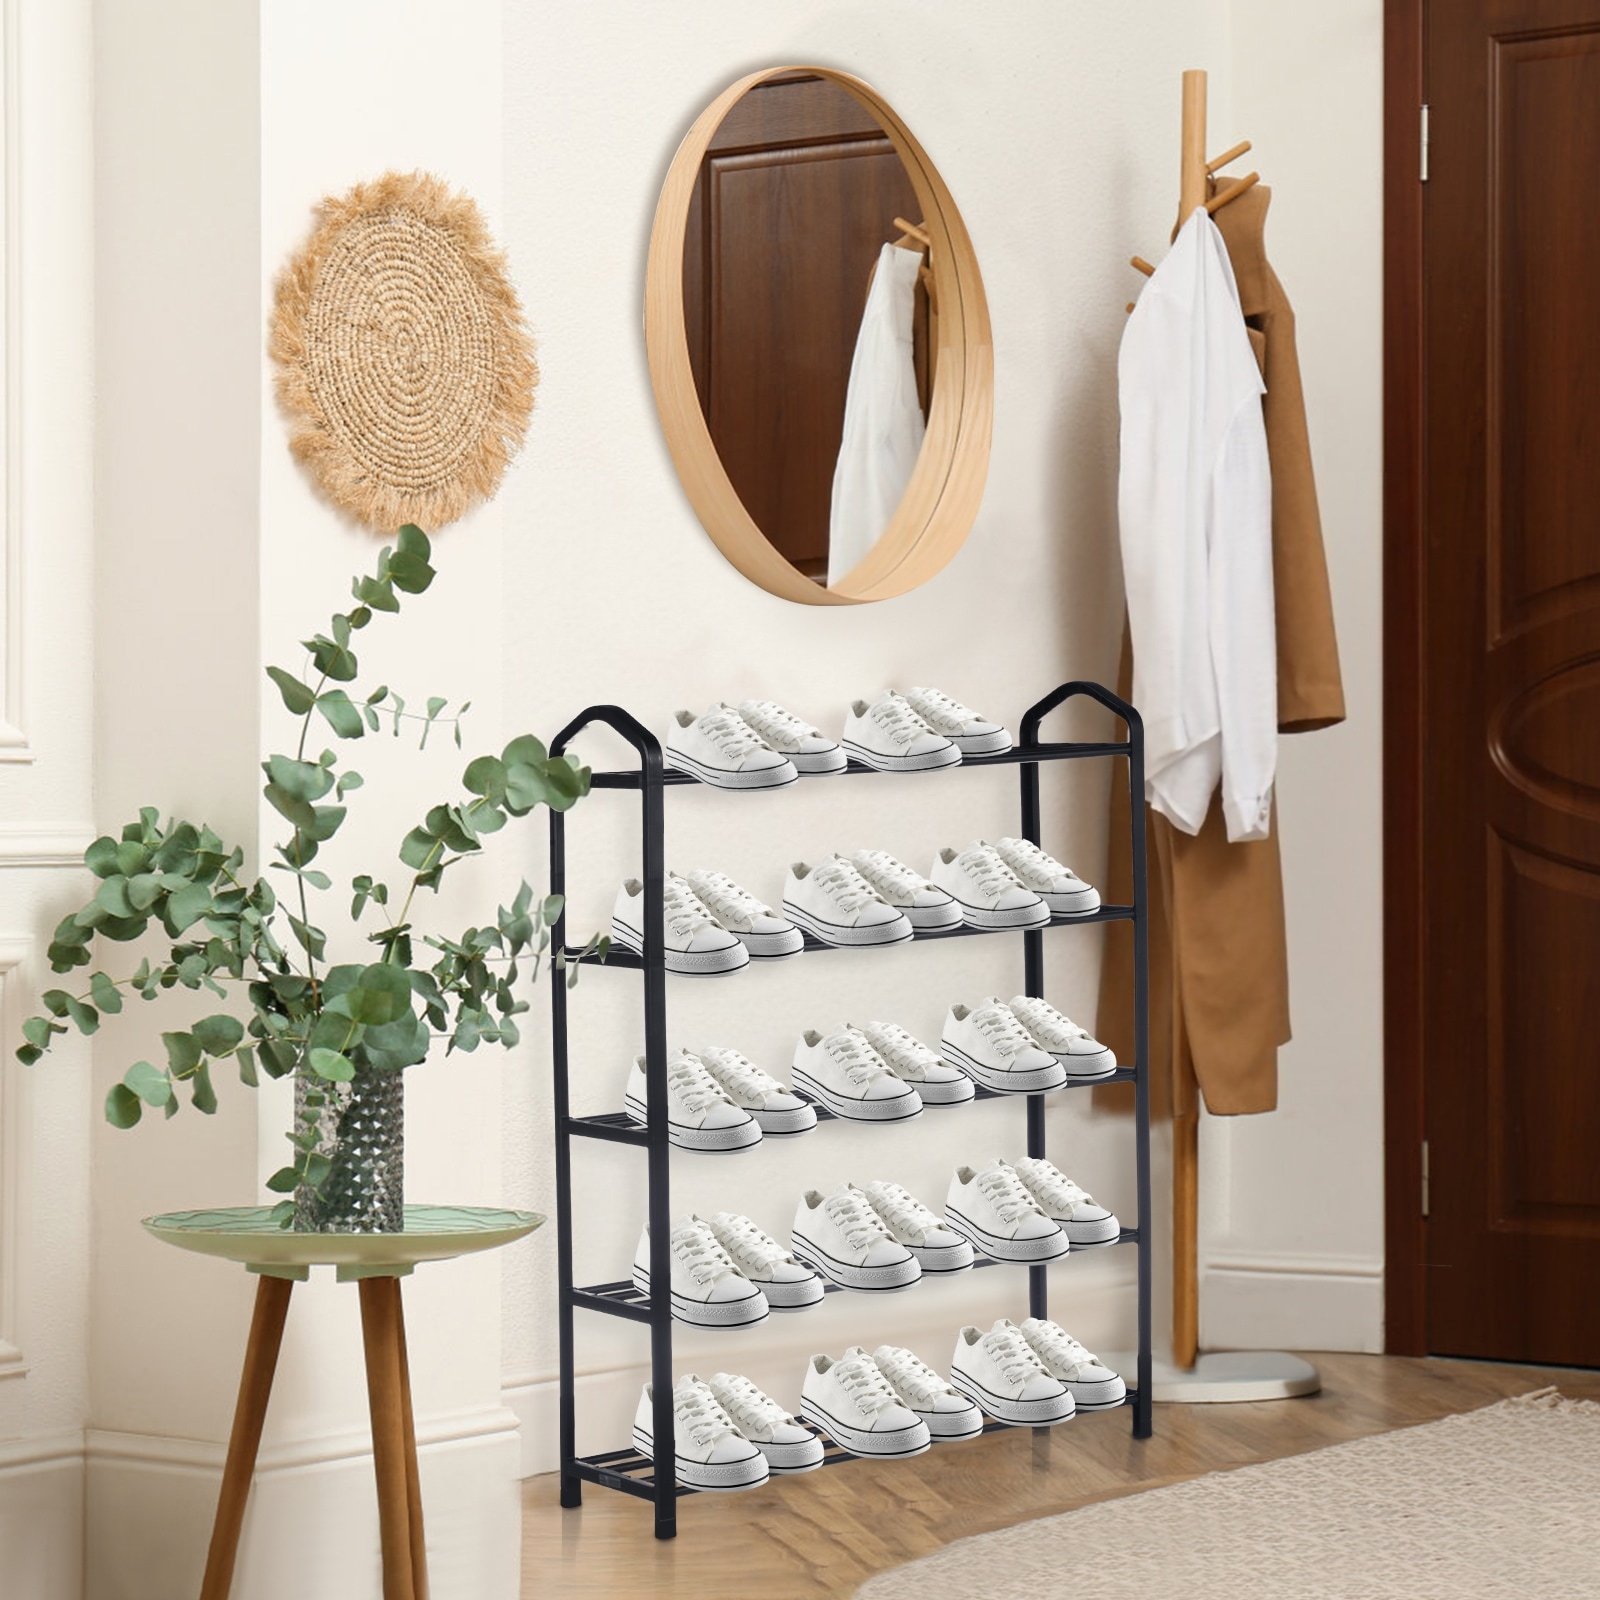 https://ak1.ostkcdn.com/images/products/is/images/direct/7438b3835c63c3c332bc95fcd68fffdd7cac2e2b/5-Tier-Stackable-Shoe-Rack%2C-Sturdy-Shelf-Storage-for-Bedroom%2C-Entryway%2C-Hallway%2C-and-Closet.jpg